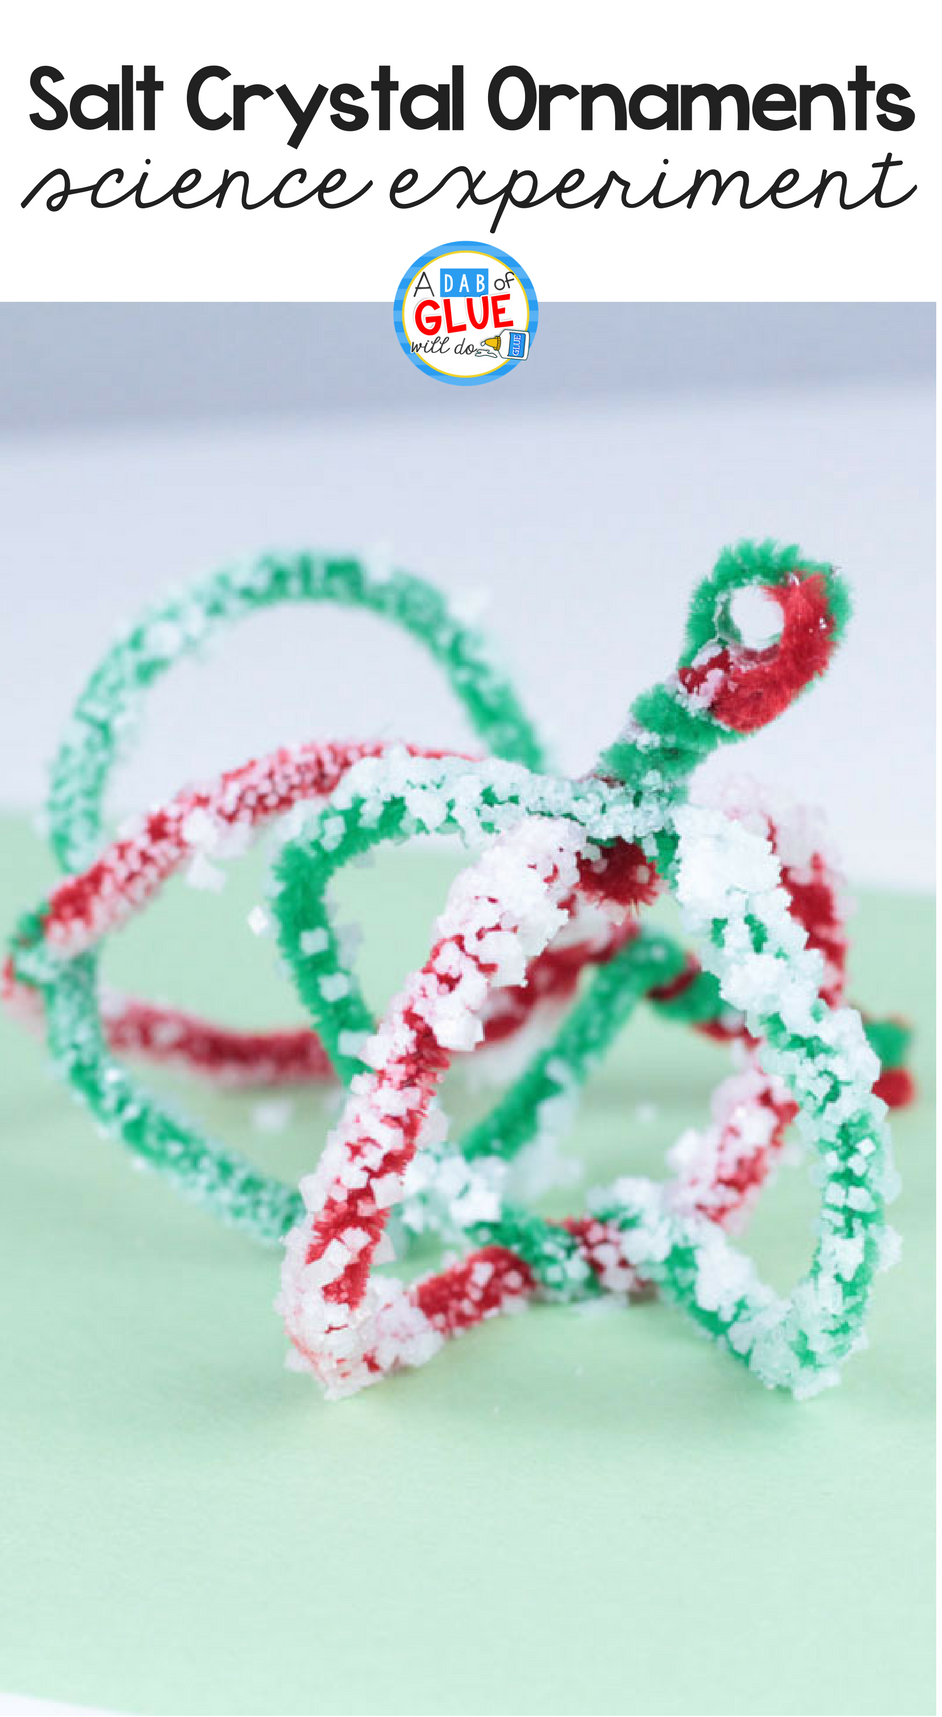 After doing the salt crystal ornament science experiment and learning about the science, kids can take the ornaments home and hang them on their Christmas trees at home, or you can use them in the classroom to decorate for the holidays.